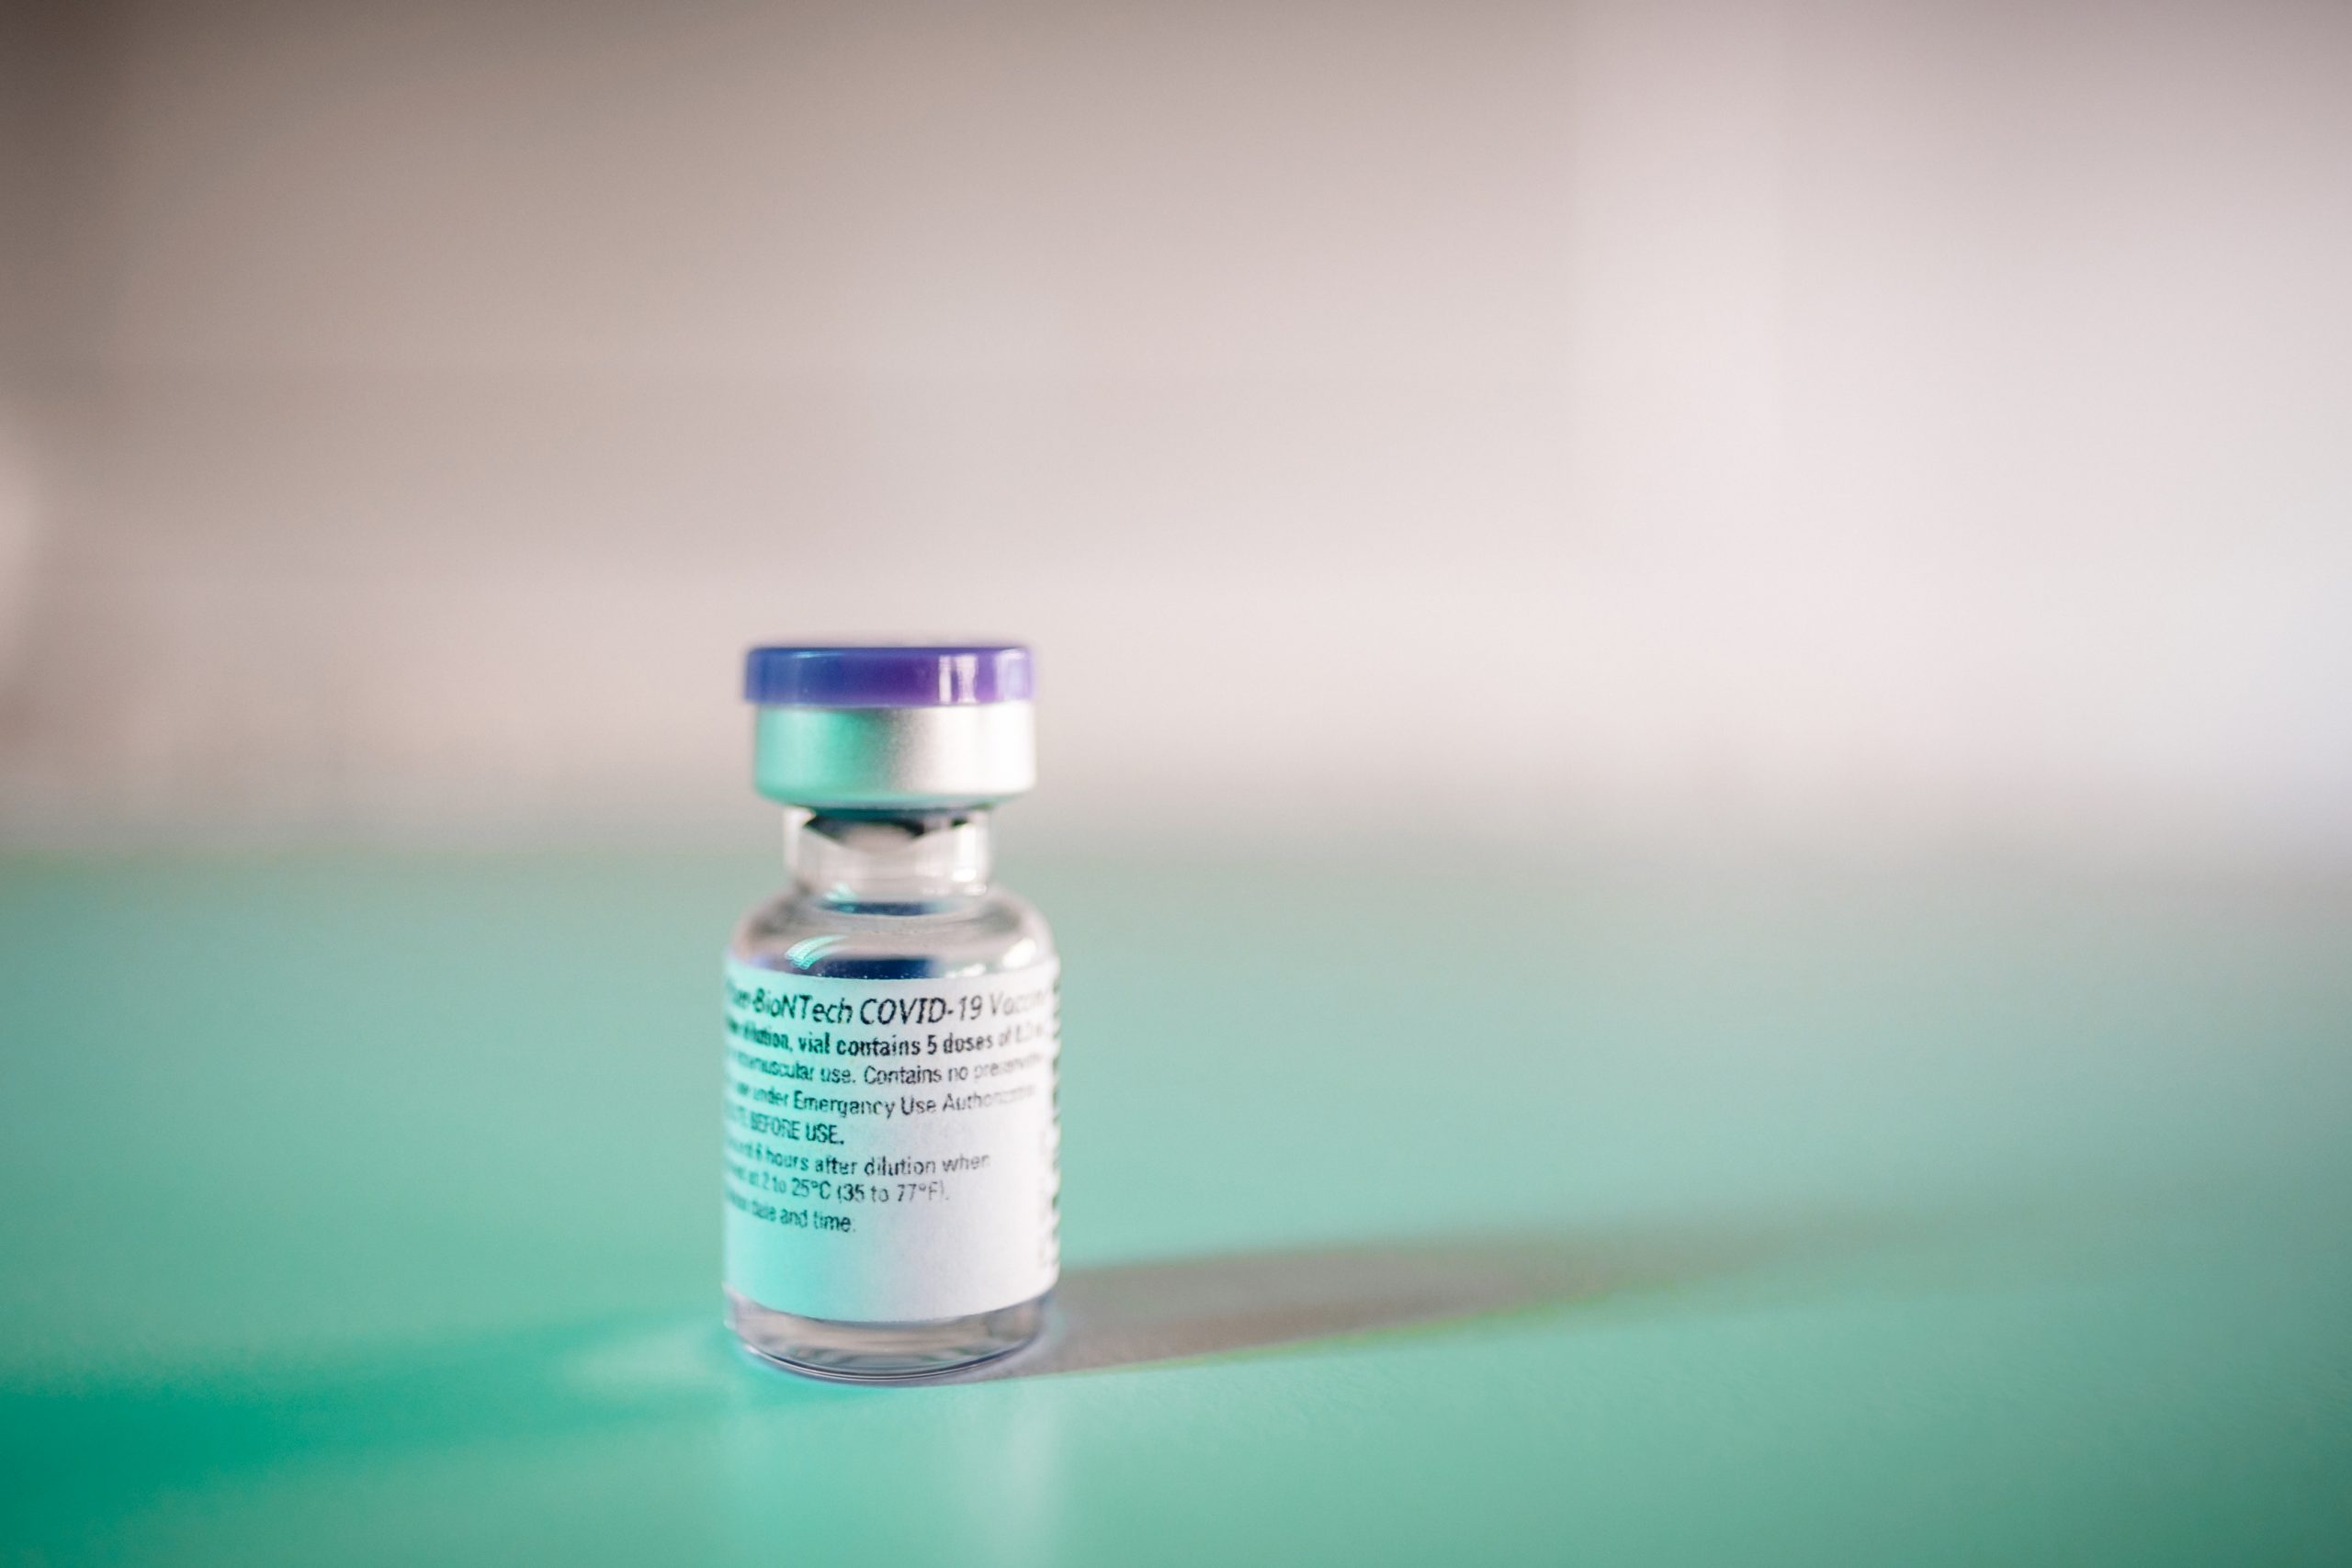 COVID-19 vaccine hotline available for Jefferson County